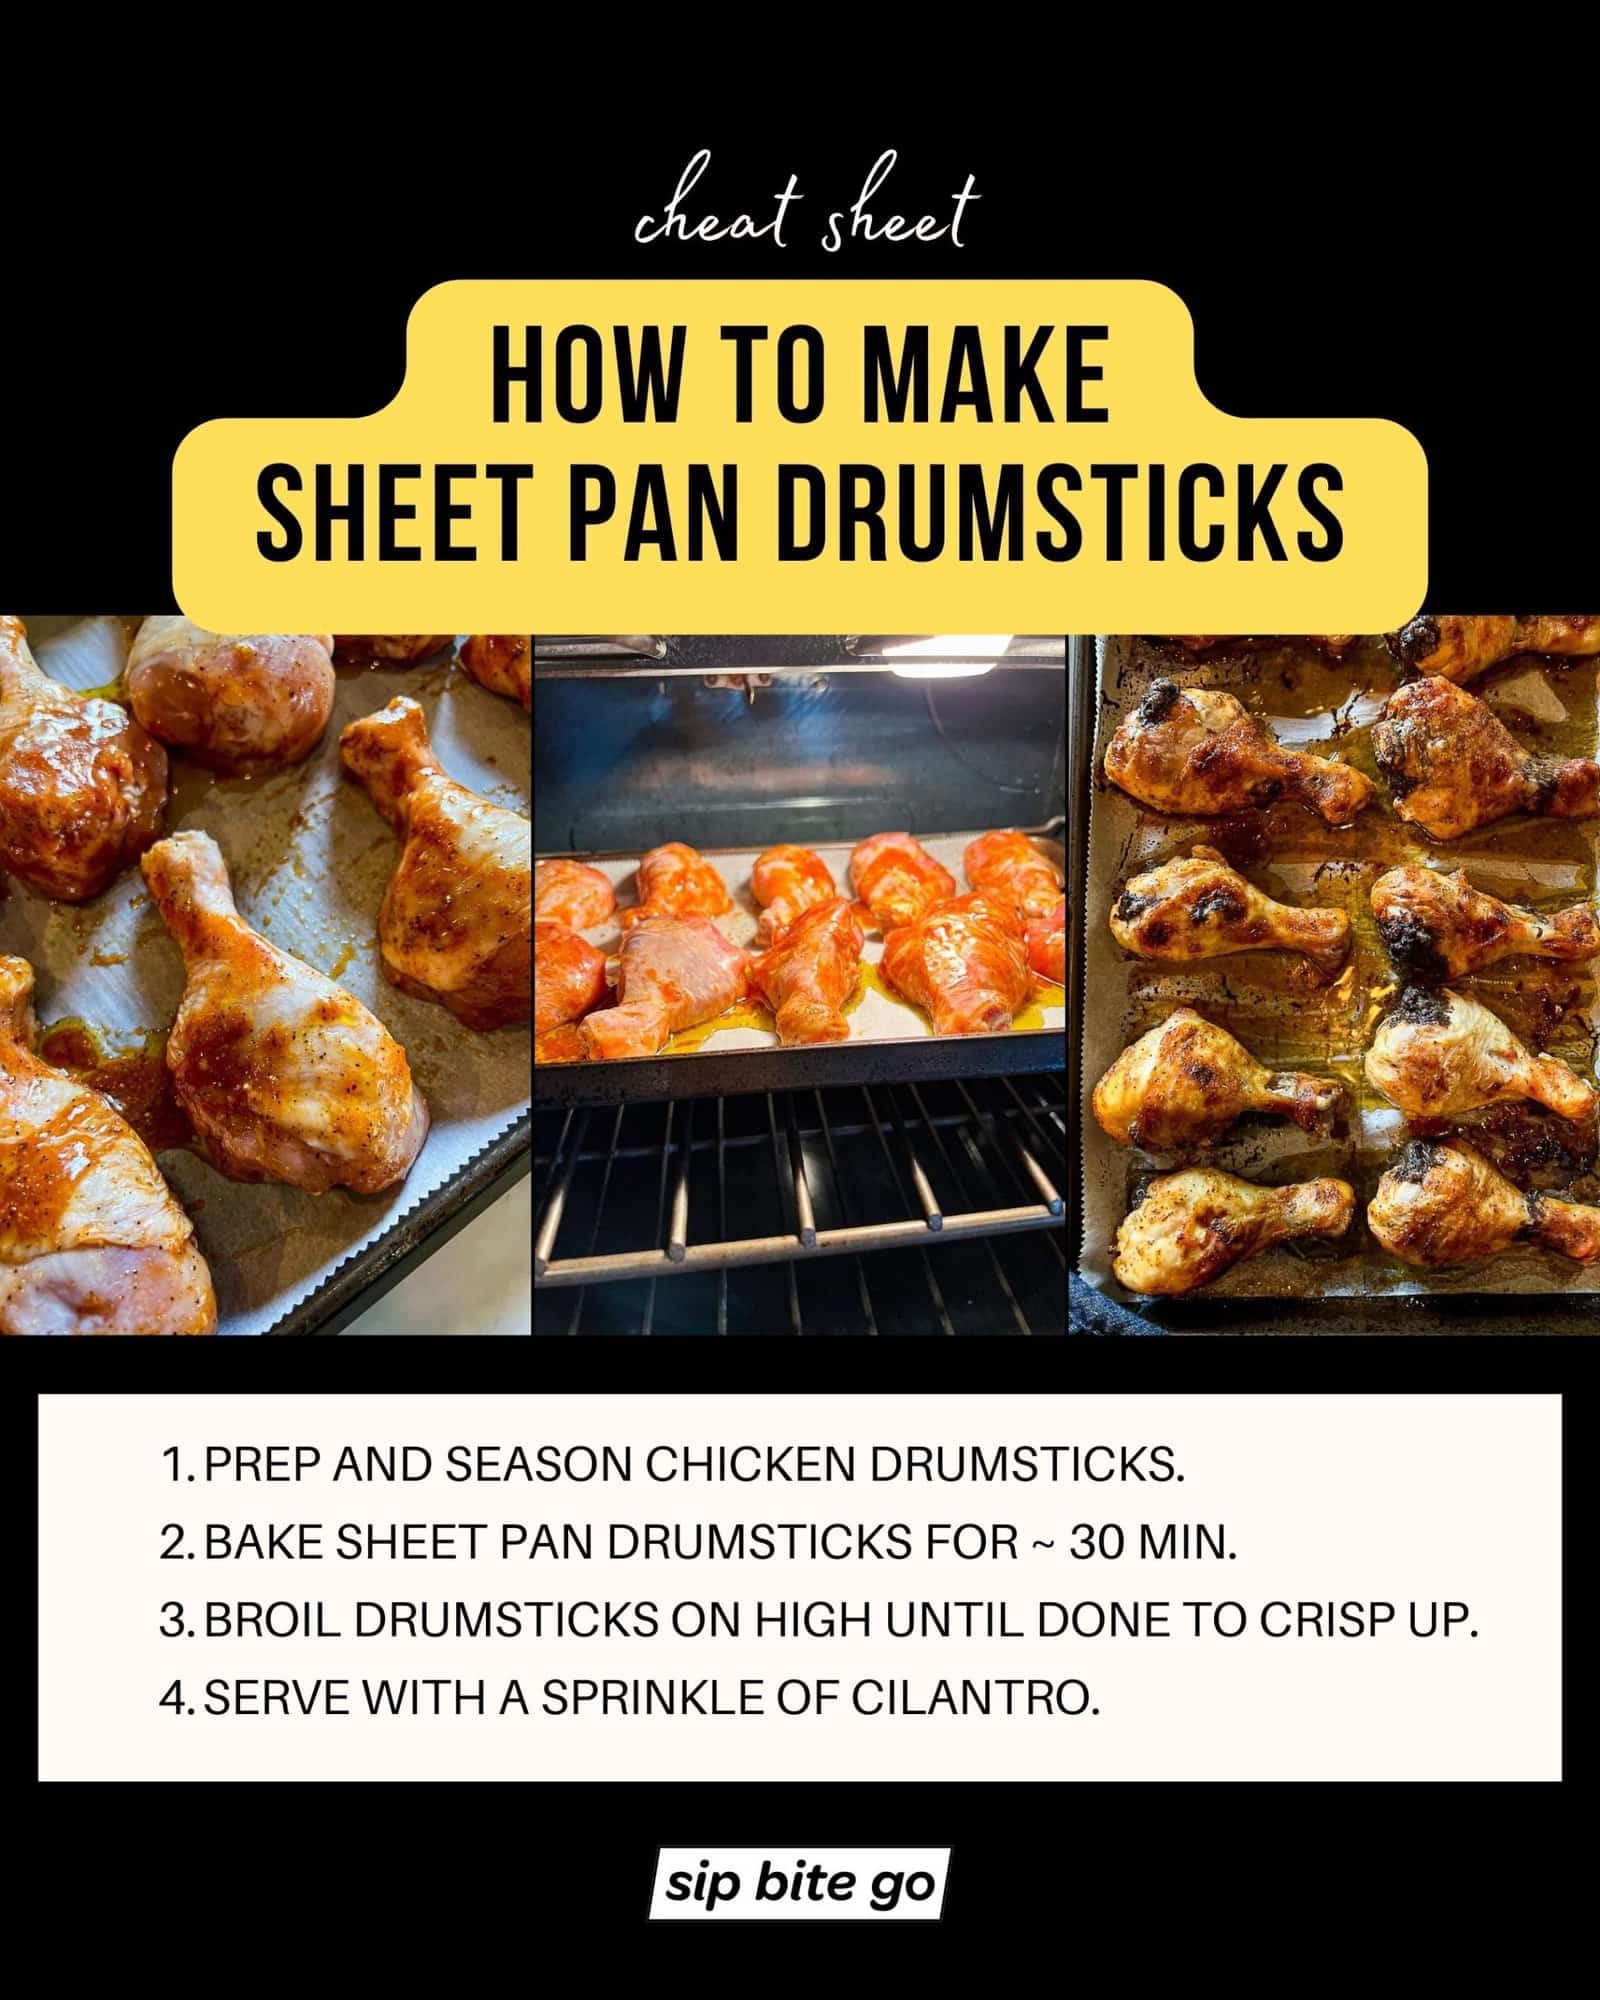 Infographic with recipe steps for baking sheet pan chicken drumsticks in the oven